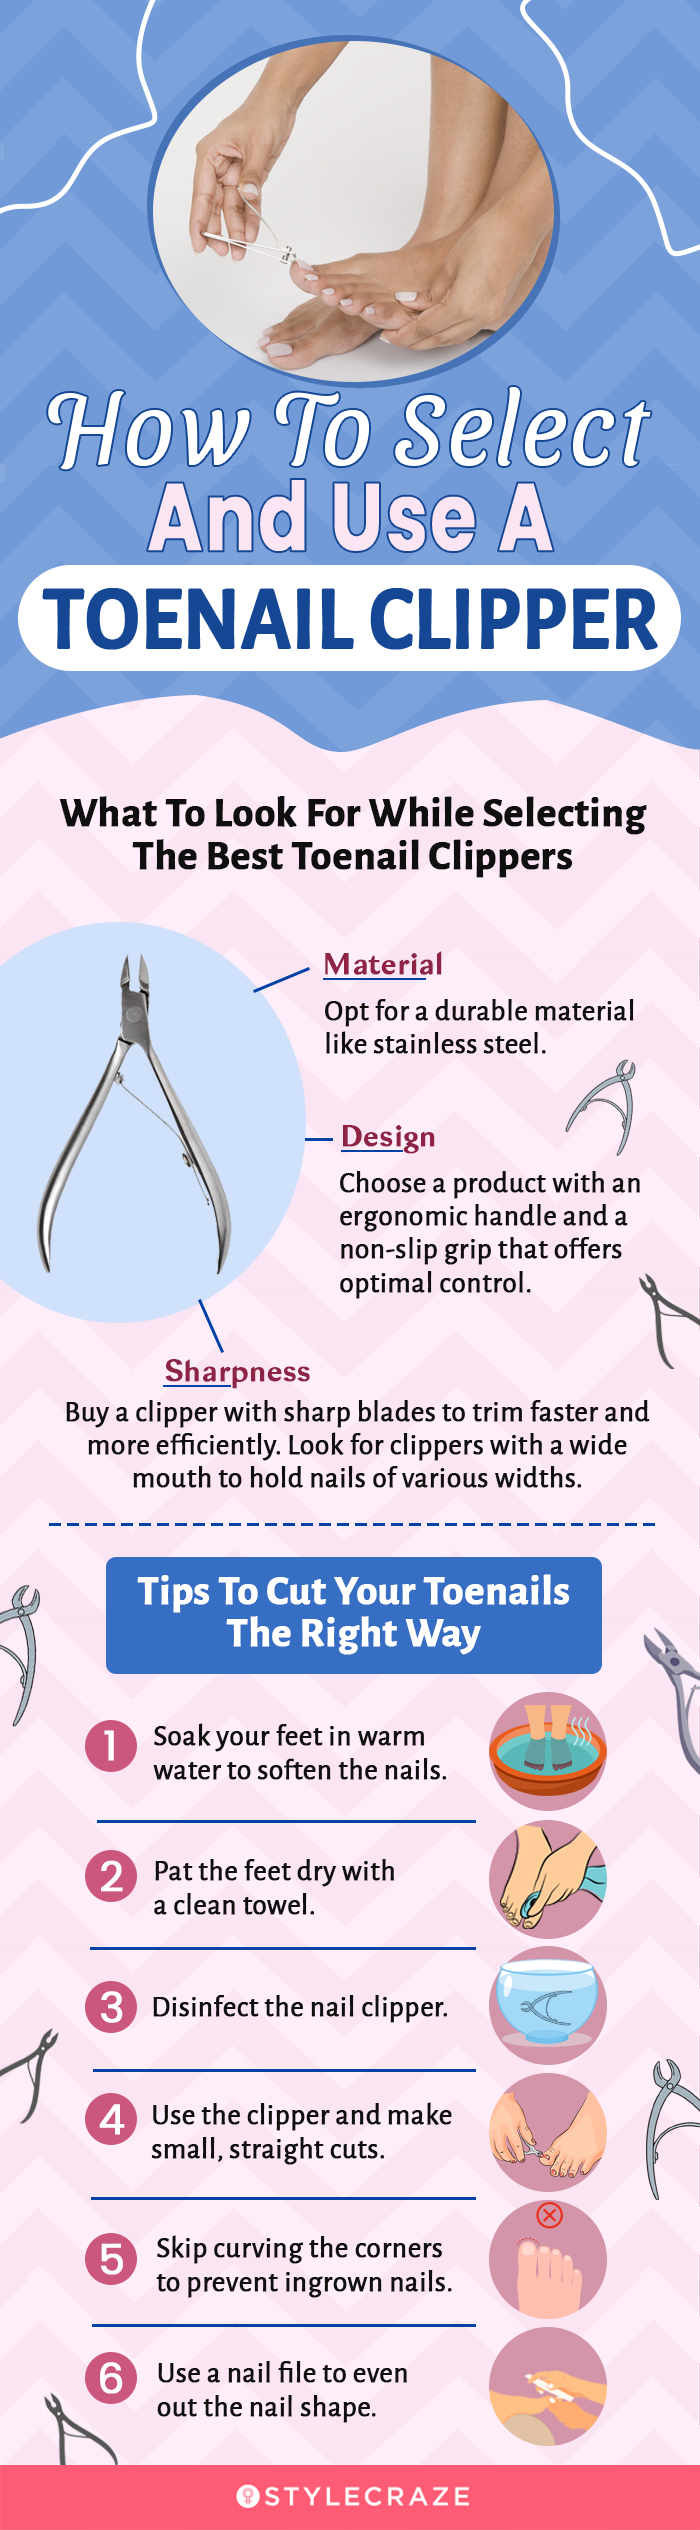 How To Select And Use A Toenail Clipper